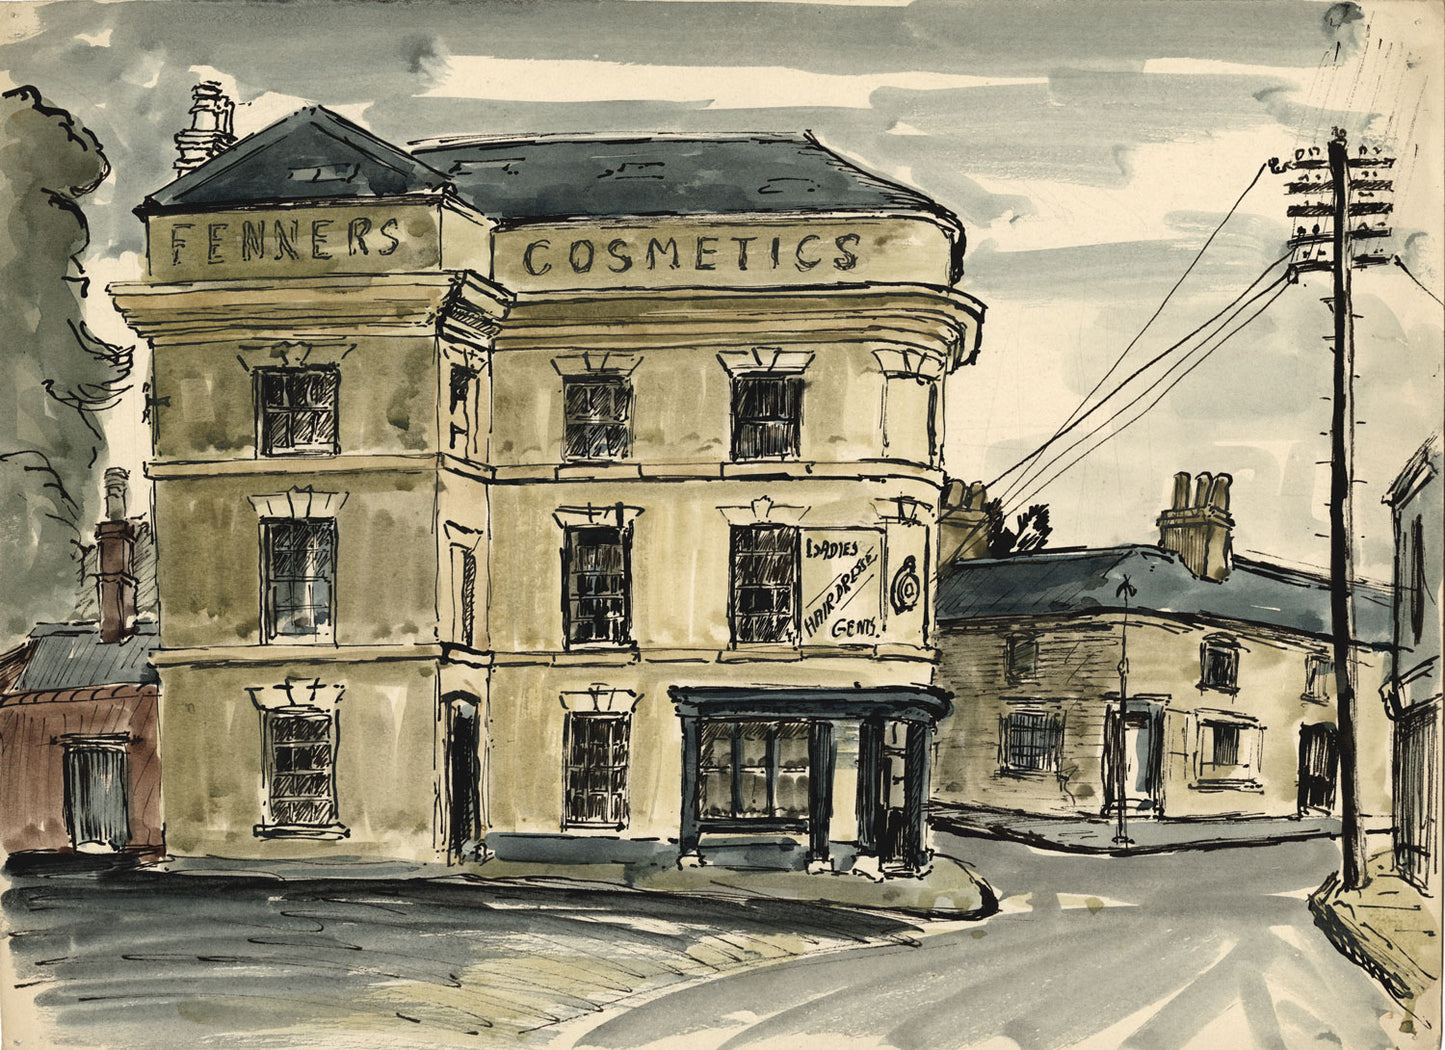 Fenners Cosmetics, Alford, Lincolnshire